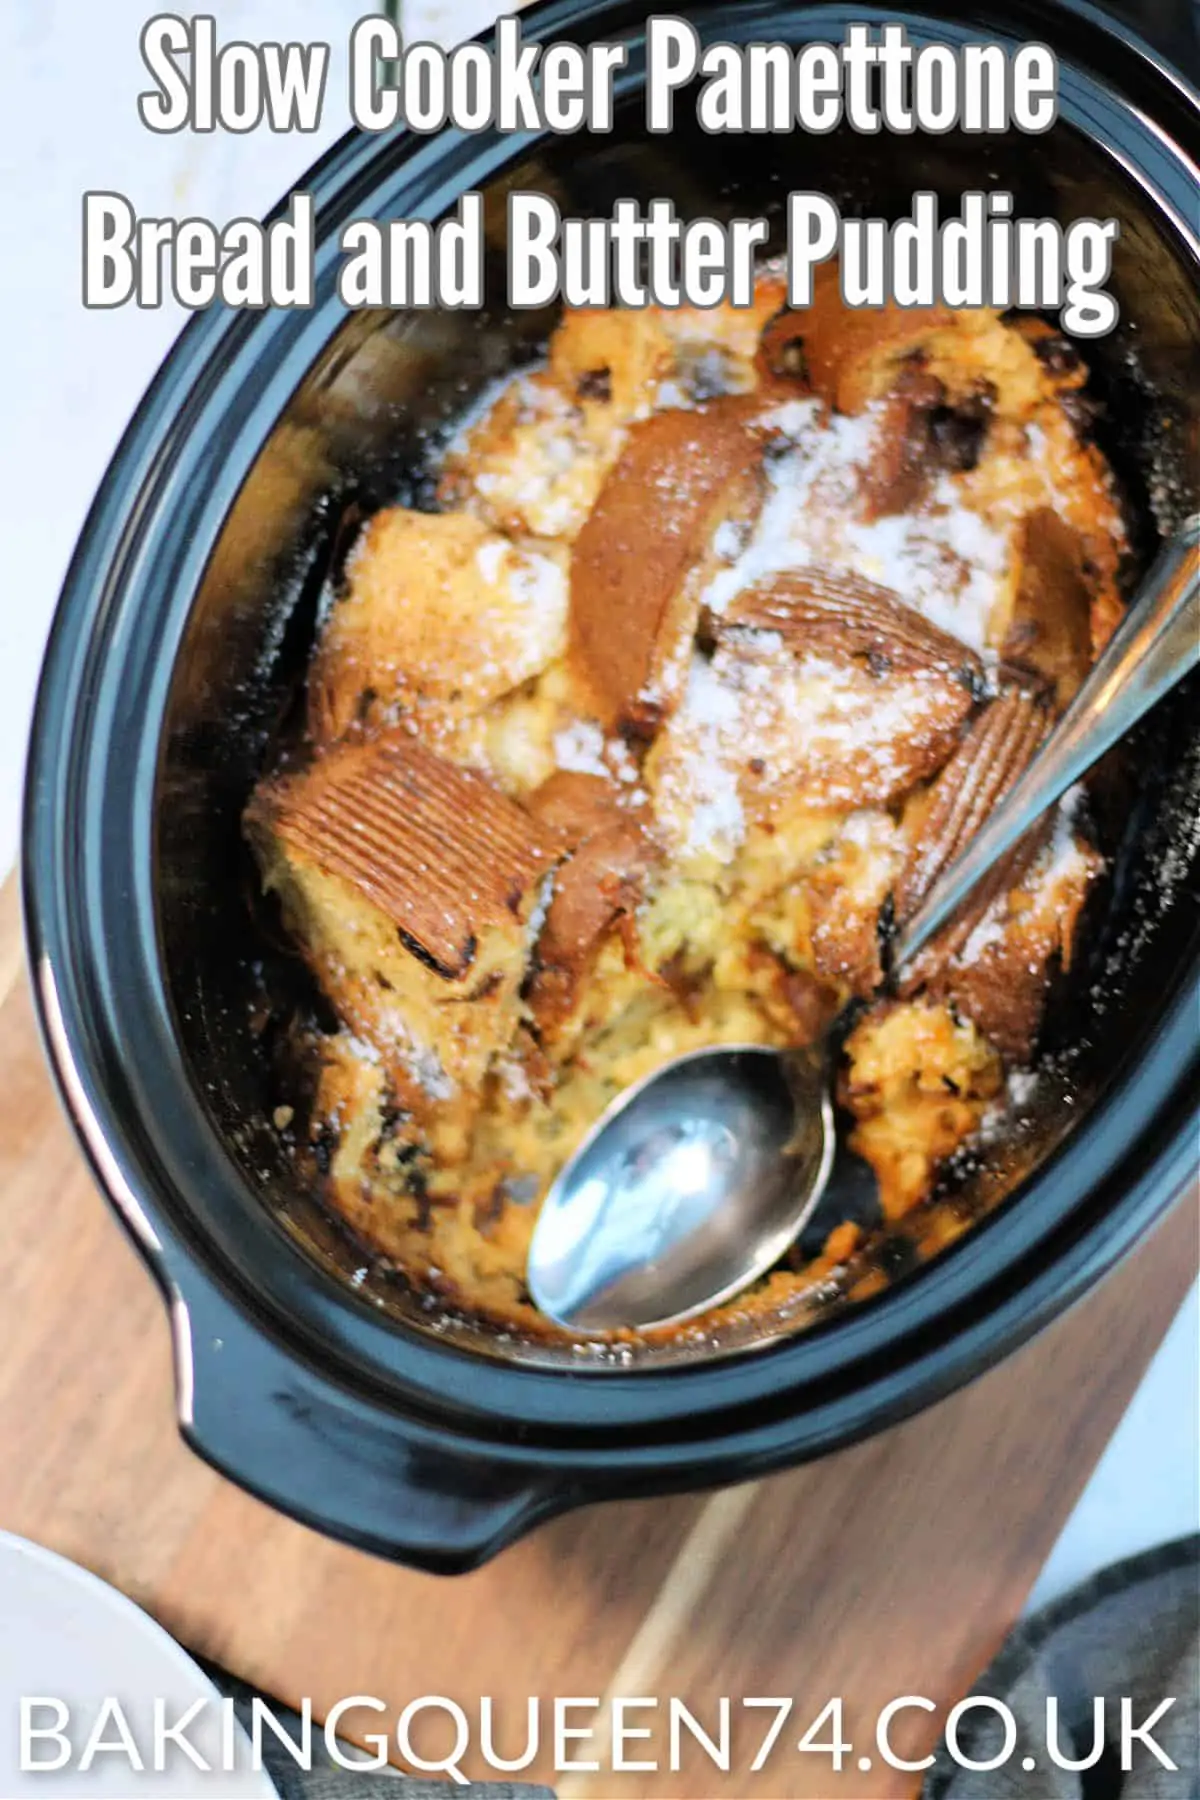 Image of dessert in slow cooker pot with text over (slow cooker panettone bread and butter pudding).